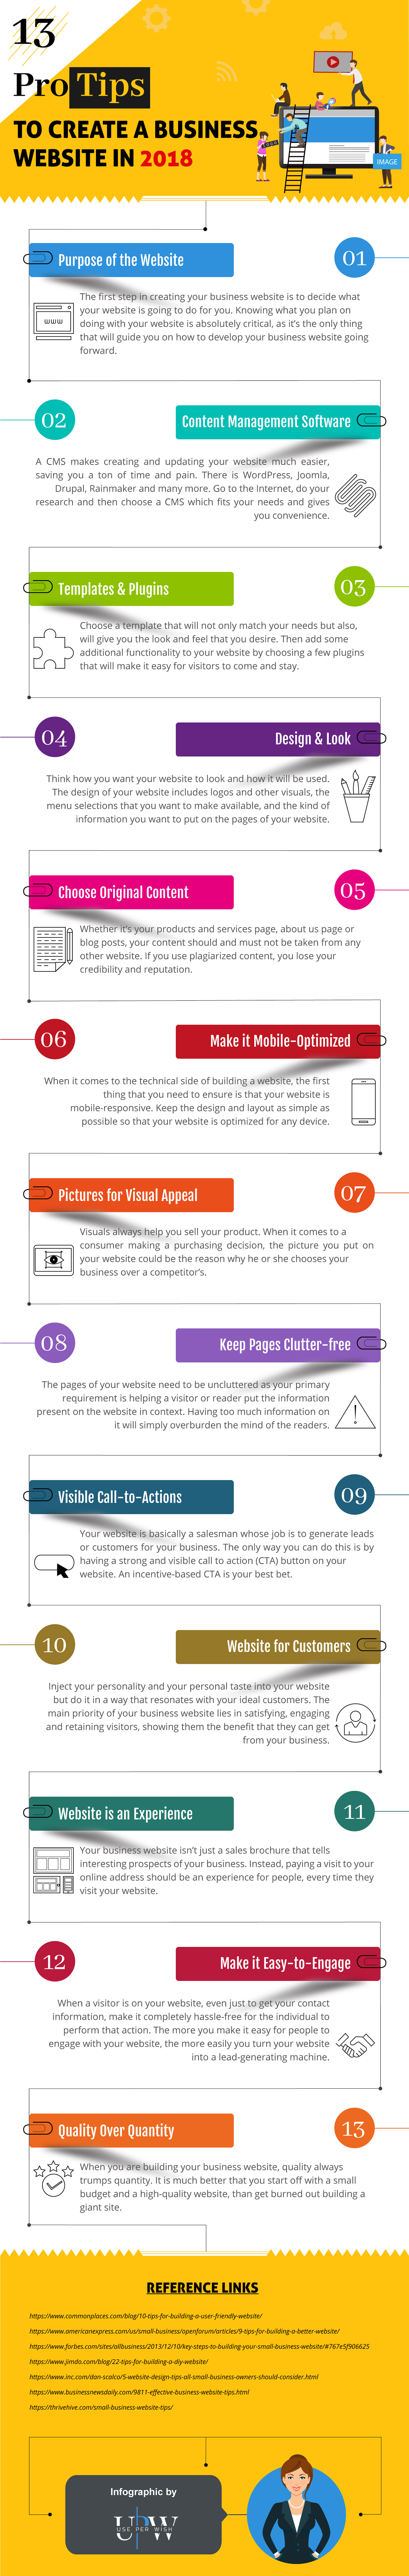 Creating your business website - infographic